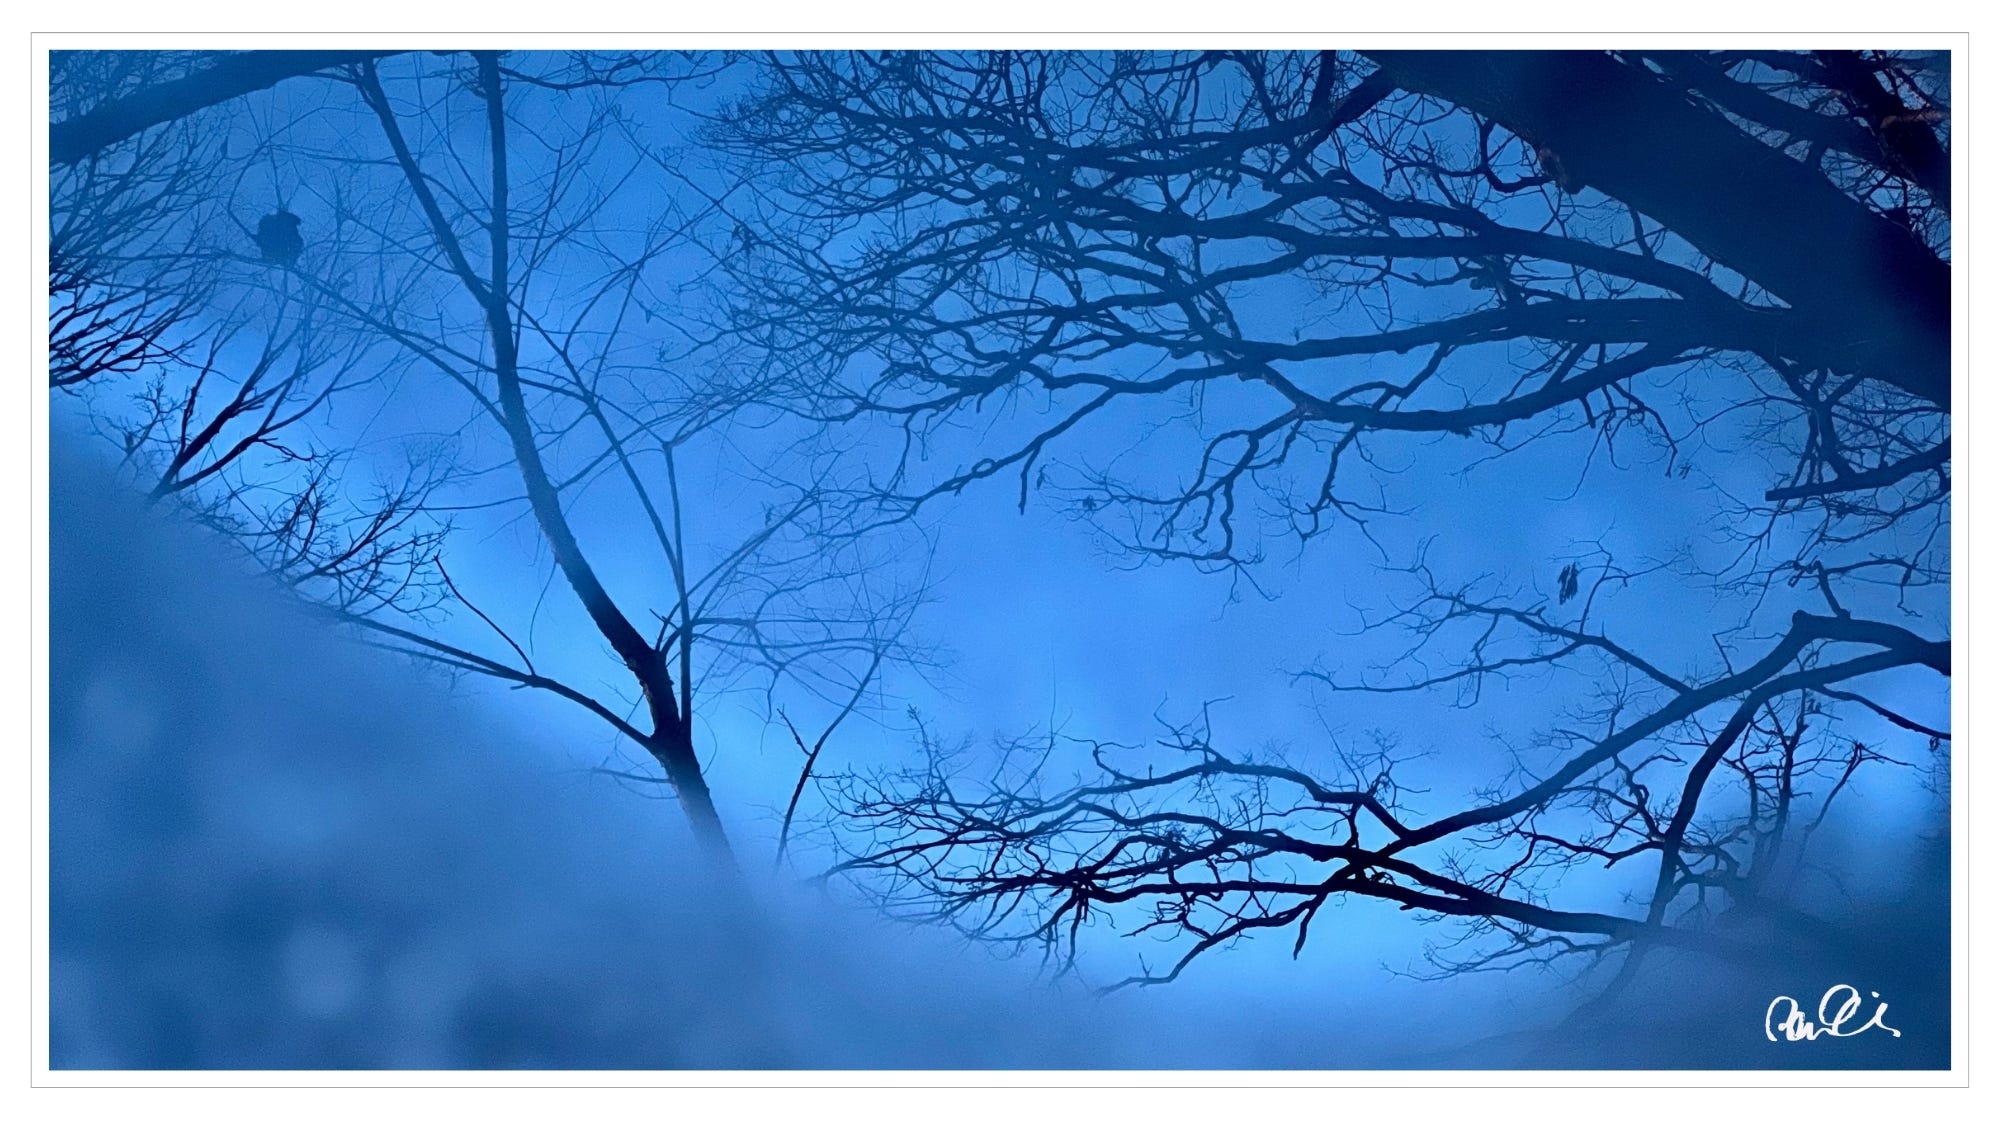 Blue light of dawn, scattered limbs through frost covered window